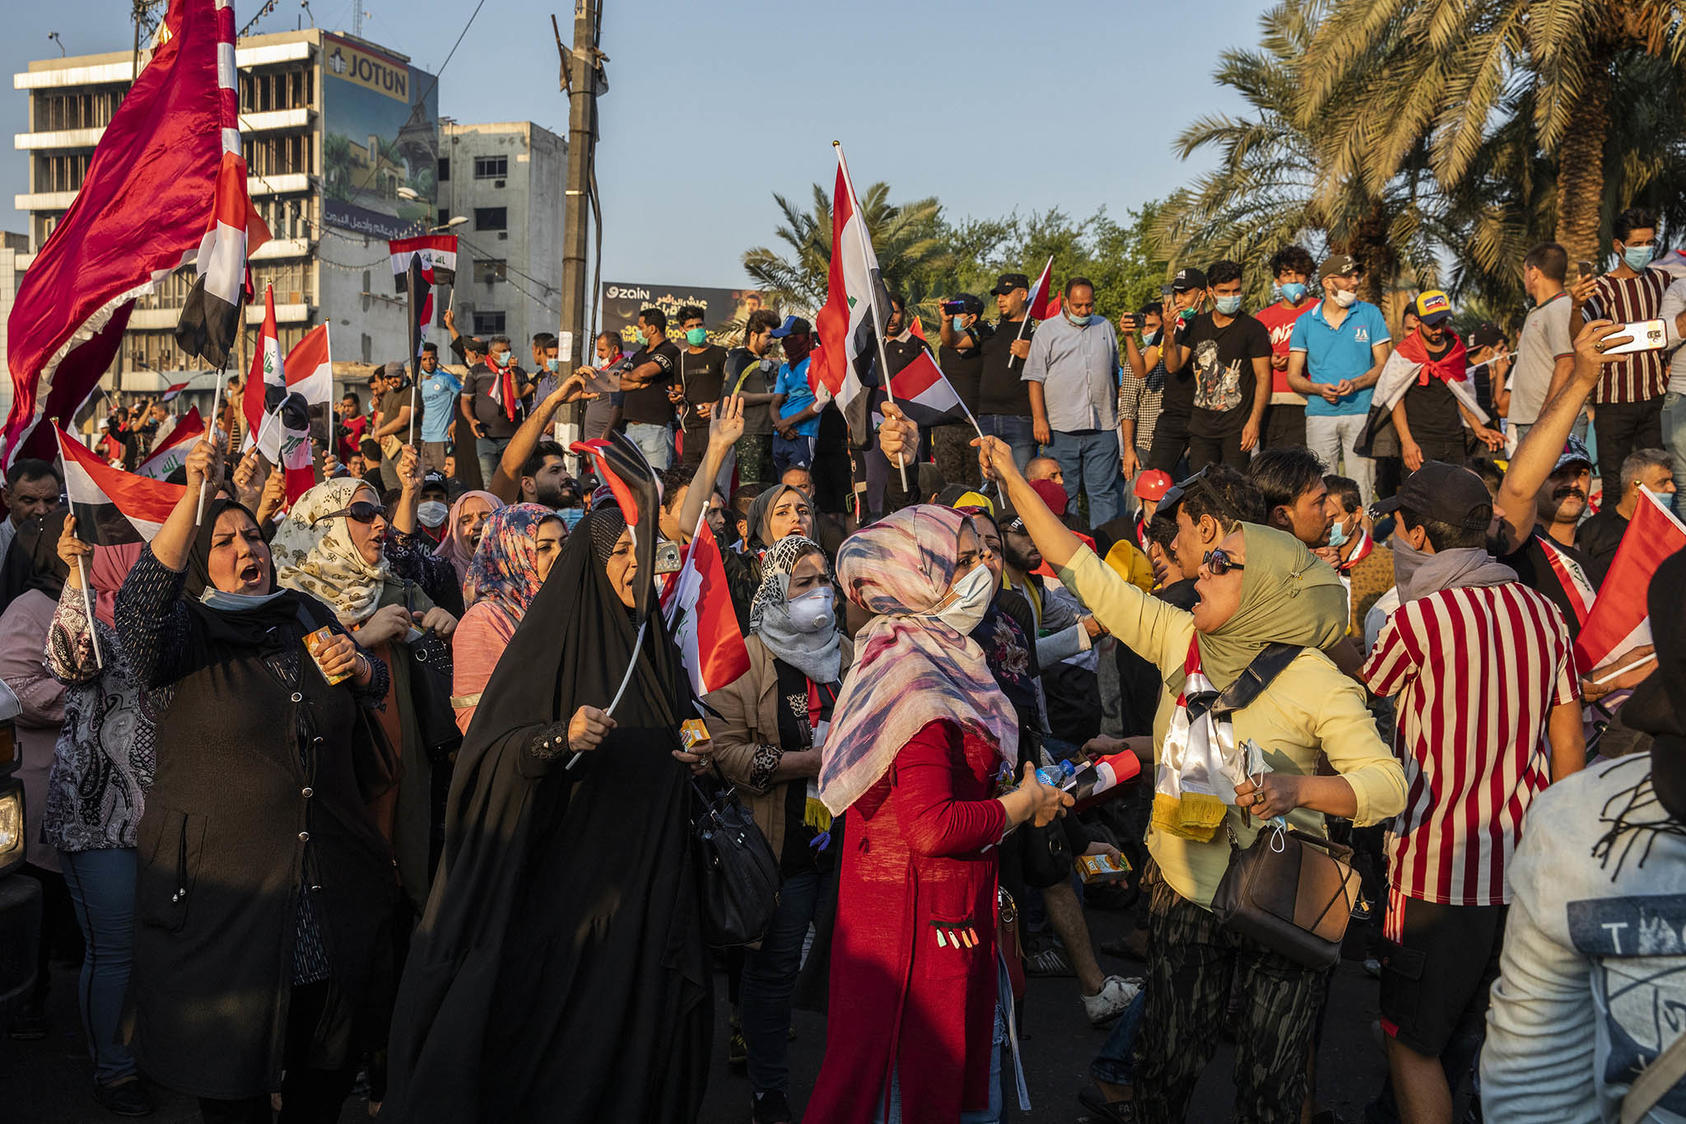 Protesters fill Tahrir Square in Baghdad, Oct. 30, 2019. (Ivor Prickett/The New York Times)